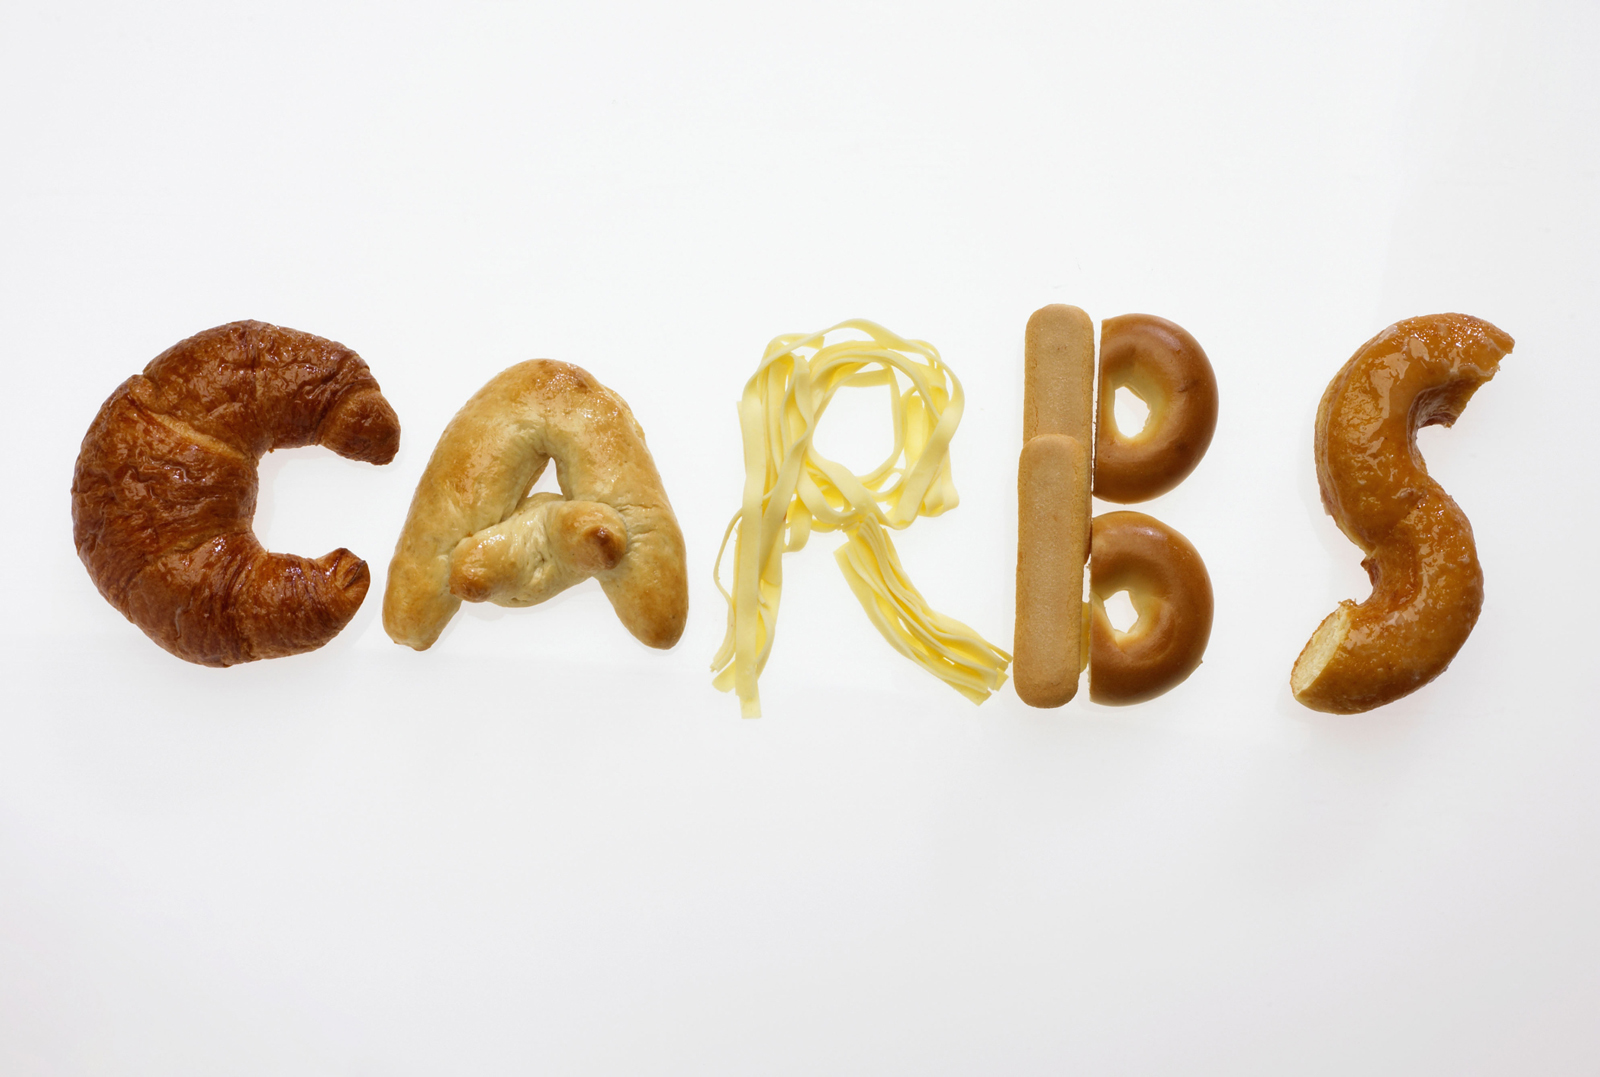 Tuesday Tips – Carbohydrate Makeover